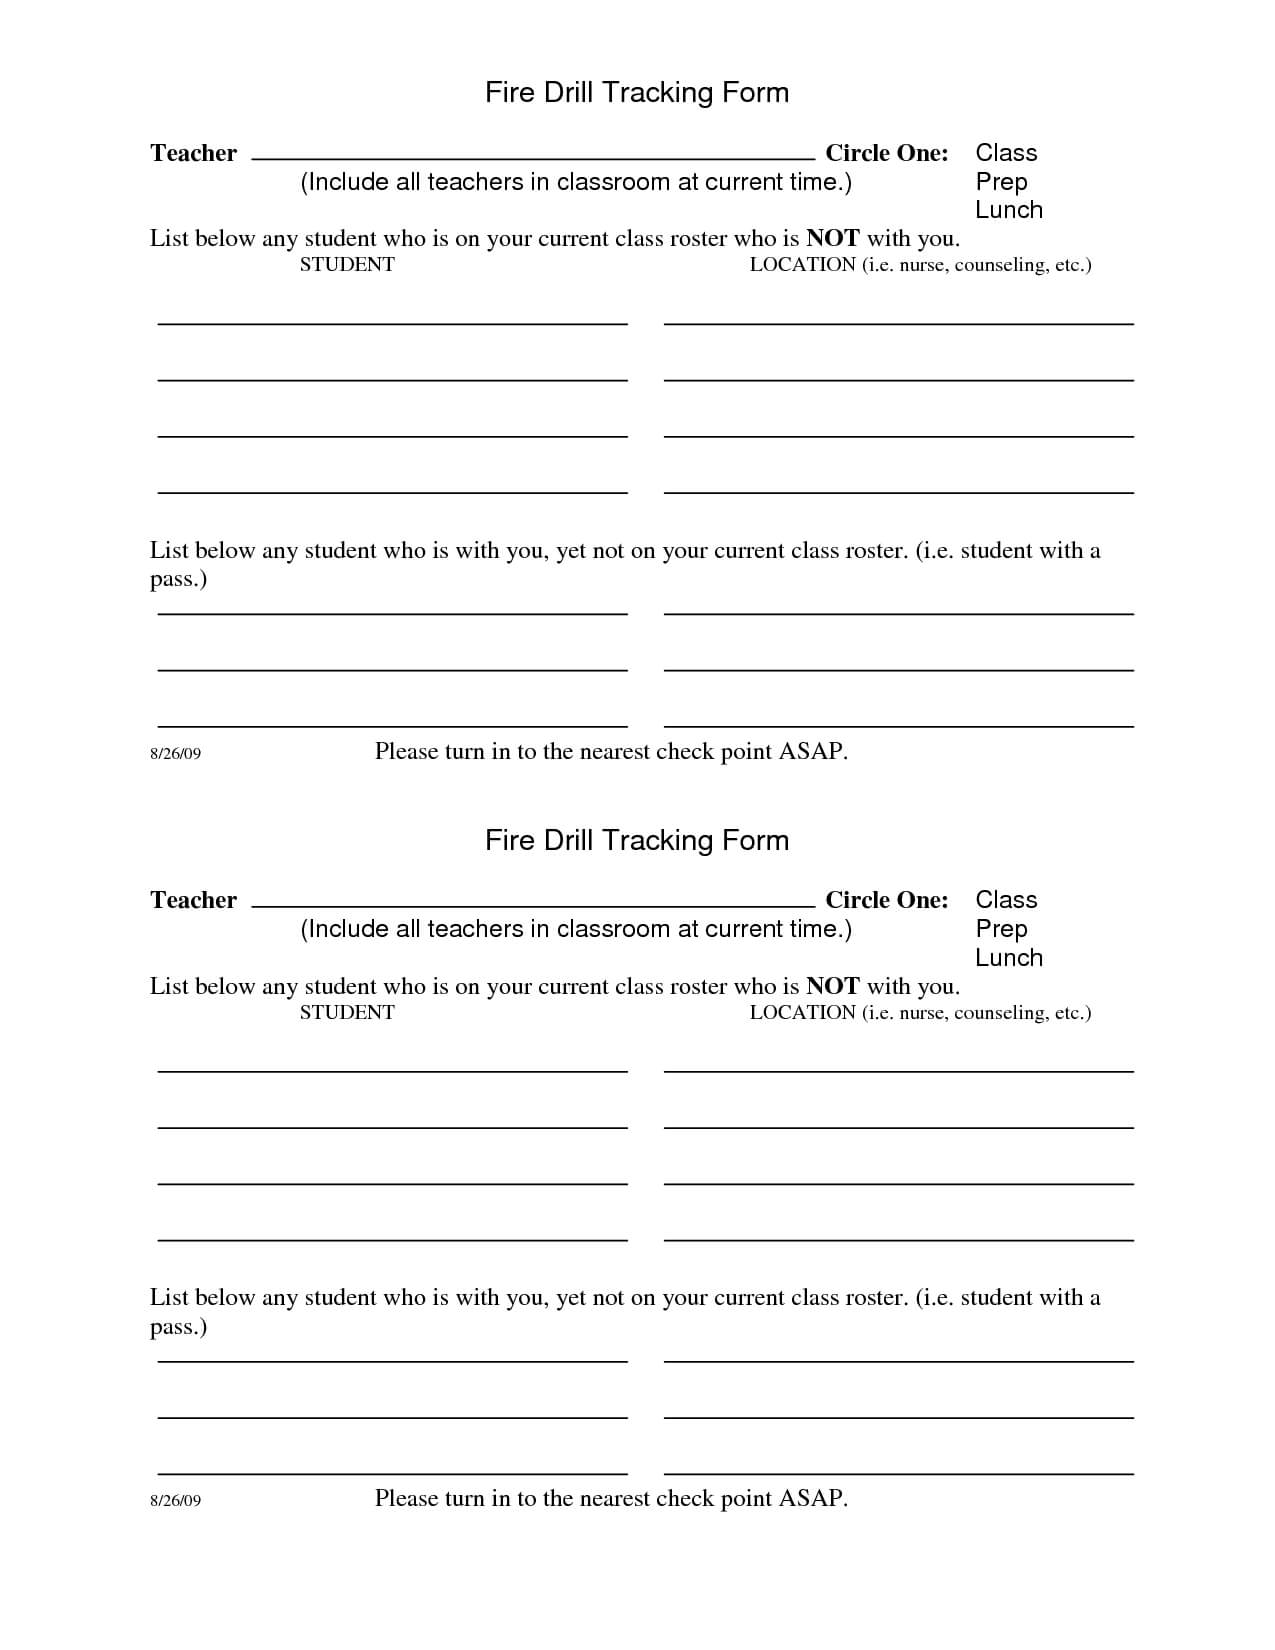 22 Images Of Osha Fire Drill Safety Template | Jackmonster Intended For Emergency Drill Report Template